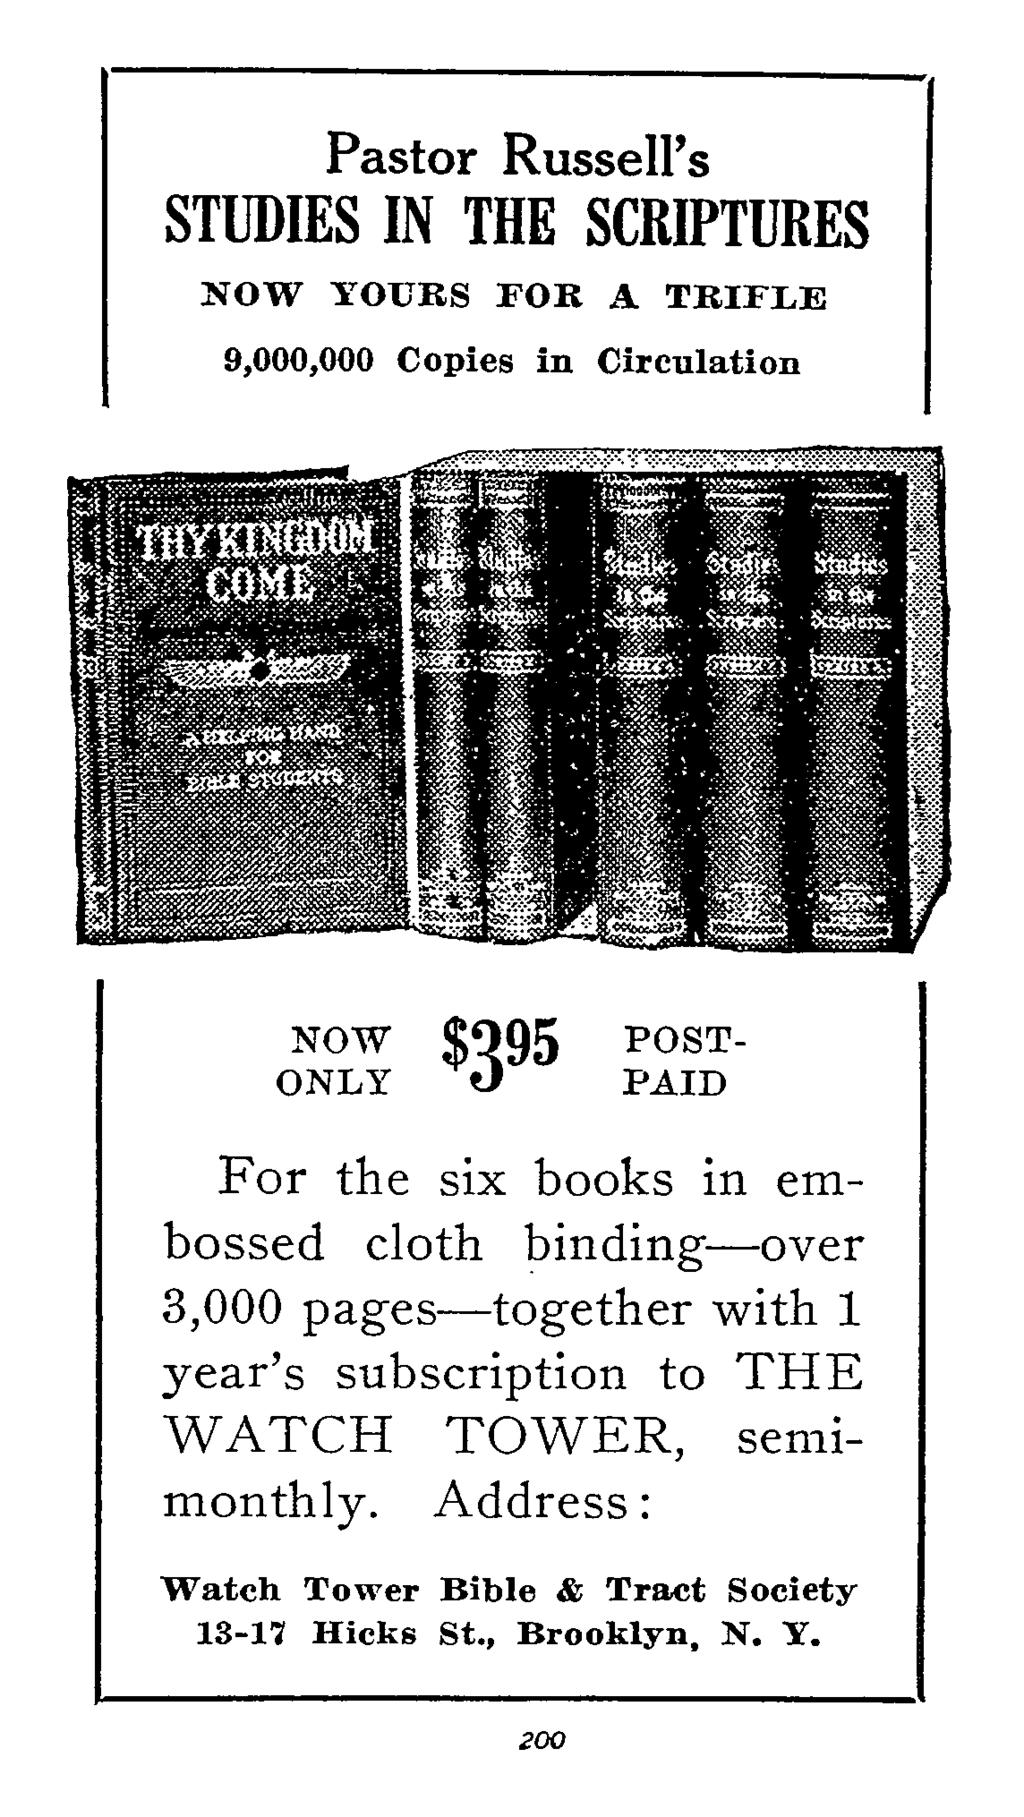 Pastor Russell s STUDIES IN THE SCRIPTURES NOW F L E YOURS FOR A TRI 9,000,000 Copies in Circulation ONLY $395 PAID For the six books in embossed cloth binding